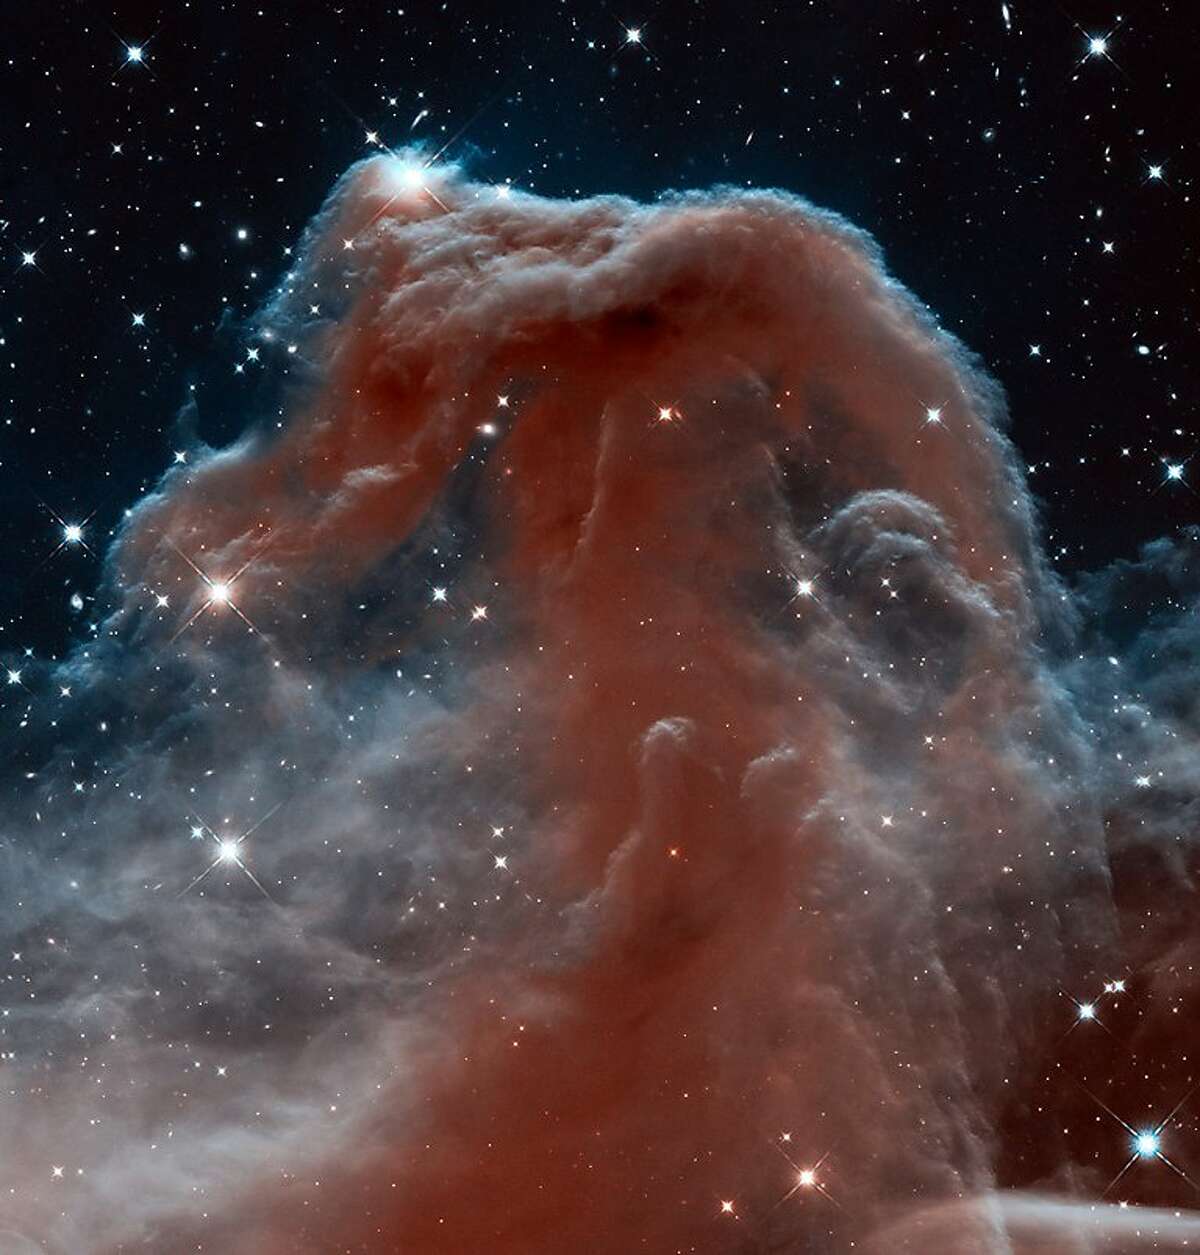  This new Hubble image, captured and released on April 19, 2013 by the ESA-NASA Hubble Heritage to celebrate the telescopeâ€™s 23rd year in orbit, shows part of the sky in the constellation of Orion (The Hunter). Rising like a giant seahorse from turbulent waves of dust and gas is the Horsehead Nebula, otherwise known as Barnard 33. This image shows the region in infrared light, which has longer wavelengths than visible light and can pierce through the dusty material that usually obscures the nebulaâ€™s inner regions. The result is a rather ethereal and fragile-looking structure, made of delicate folds of gas â€” very different to the nebulaâ€™s appearance in visible light.== RESTRICTED TO EDITORIAL USE - MANDATORY CREDIT "AFP PHOTO / NASA, ESA, and the Hubble Heritage Team (STScI/AURA)" - NO MARKETING - NO ADVERTISING CAMPAIGNS - DISTRIBUTED AS A SERVICE TO CLIENTS ==HO/AFP/Getty Images